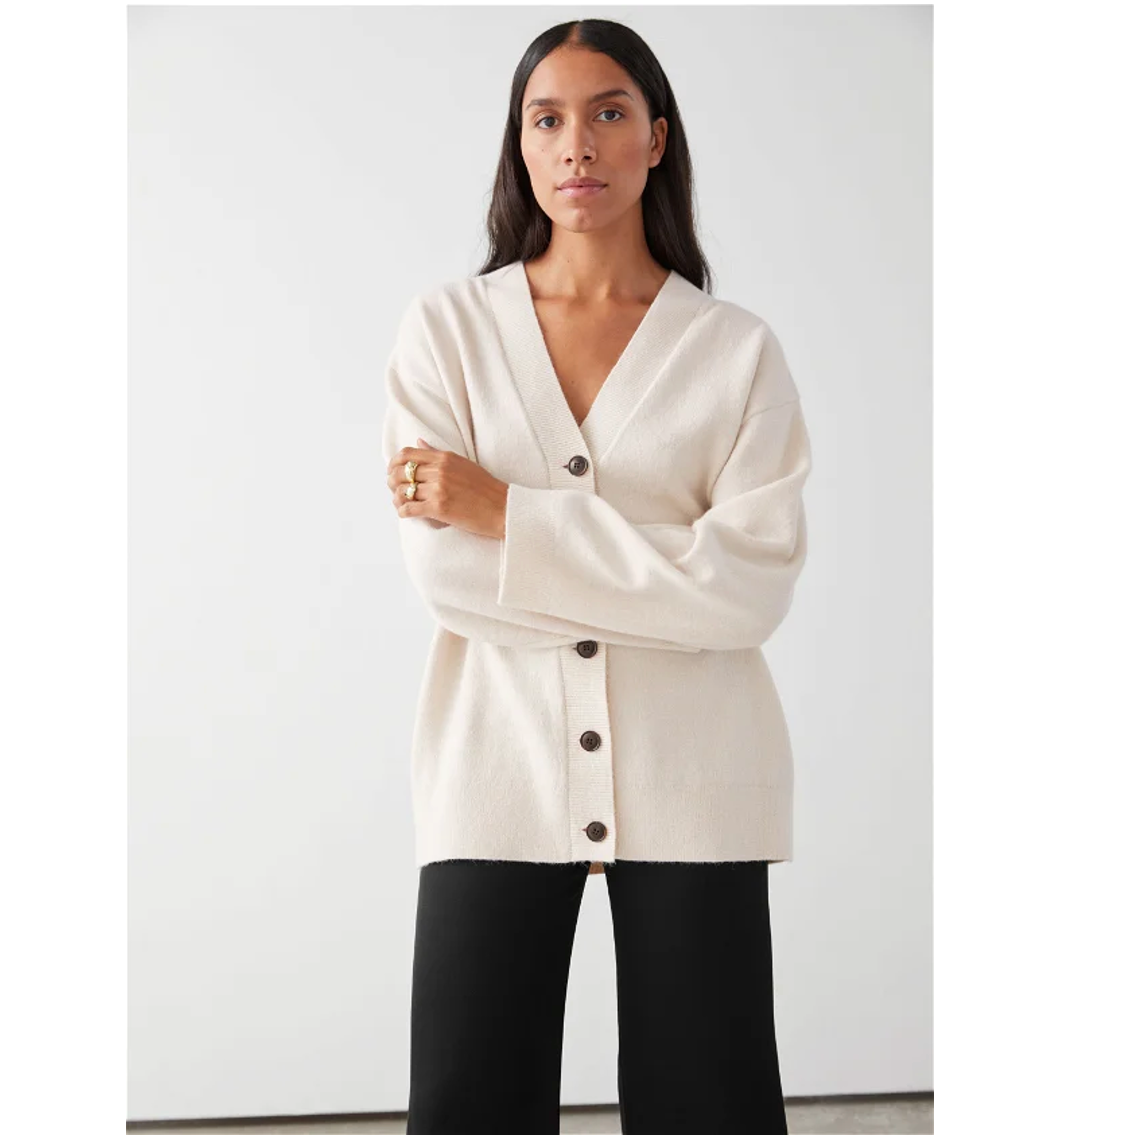 & Other Stories oversized ivory button up cardigan 